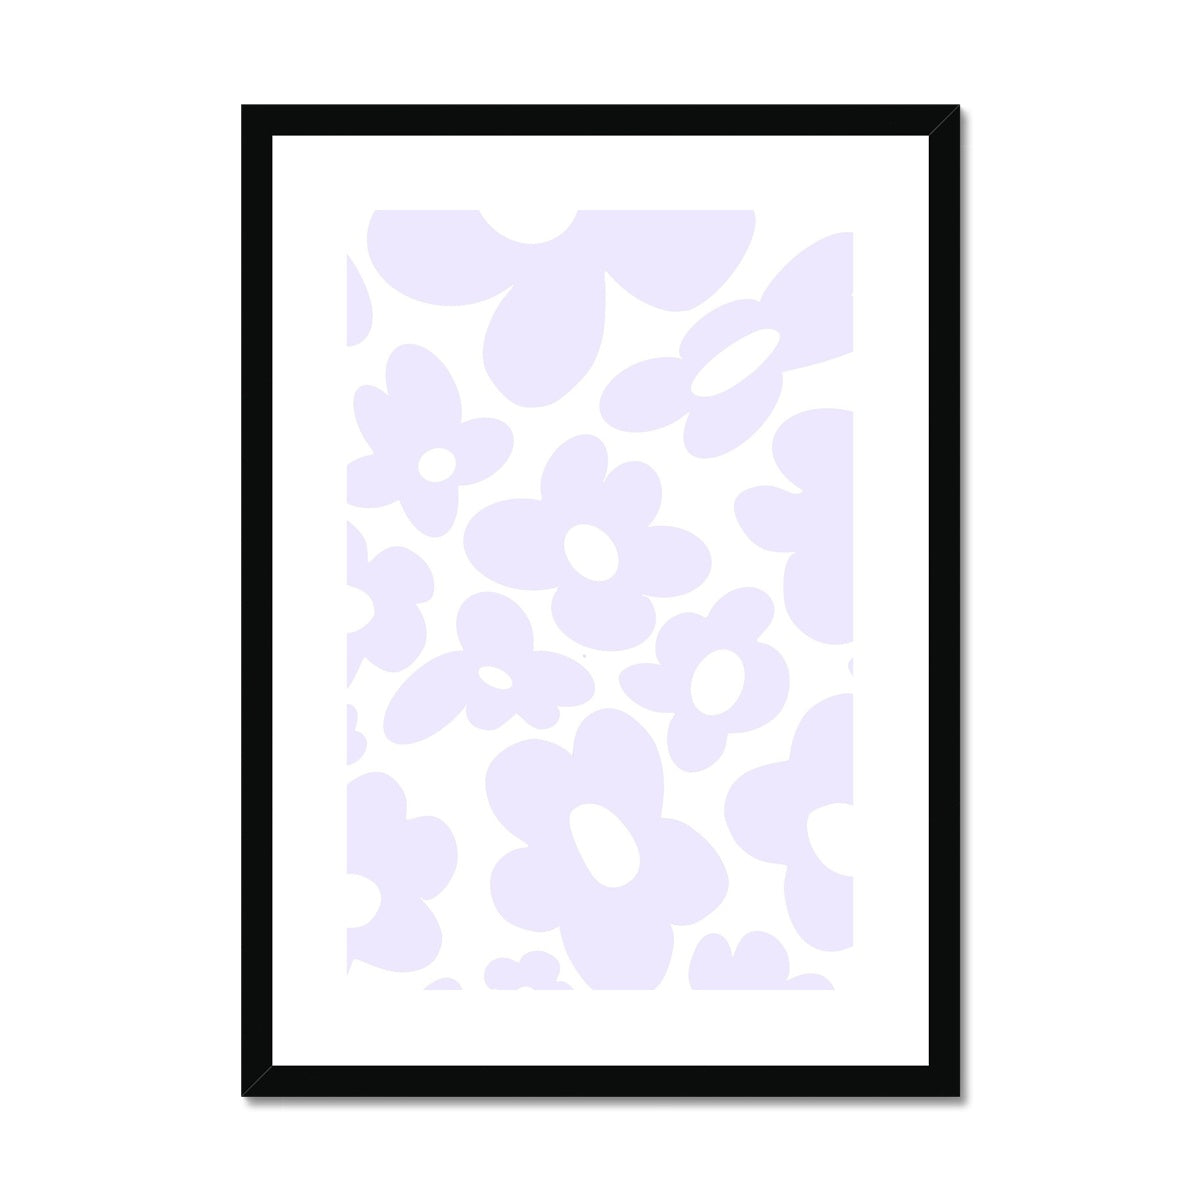 © les muses / Retro Flowers is a collection of wall art with groovy daisy prints in dreamy pastels with a trendy 70s aesthetic. Funky flower posters full of daisies perfect for danish pastel dorm and apartment decor.